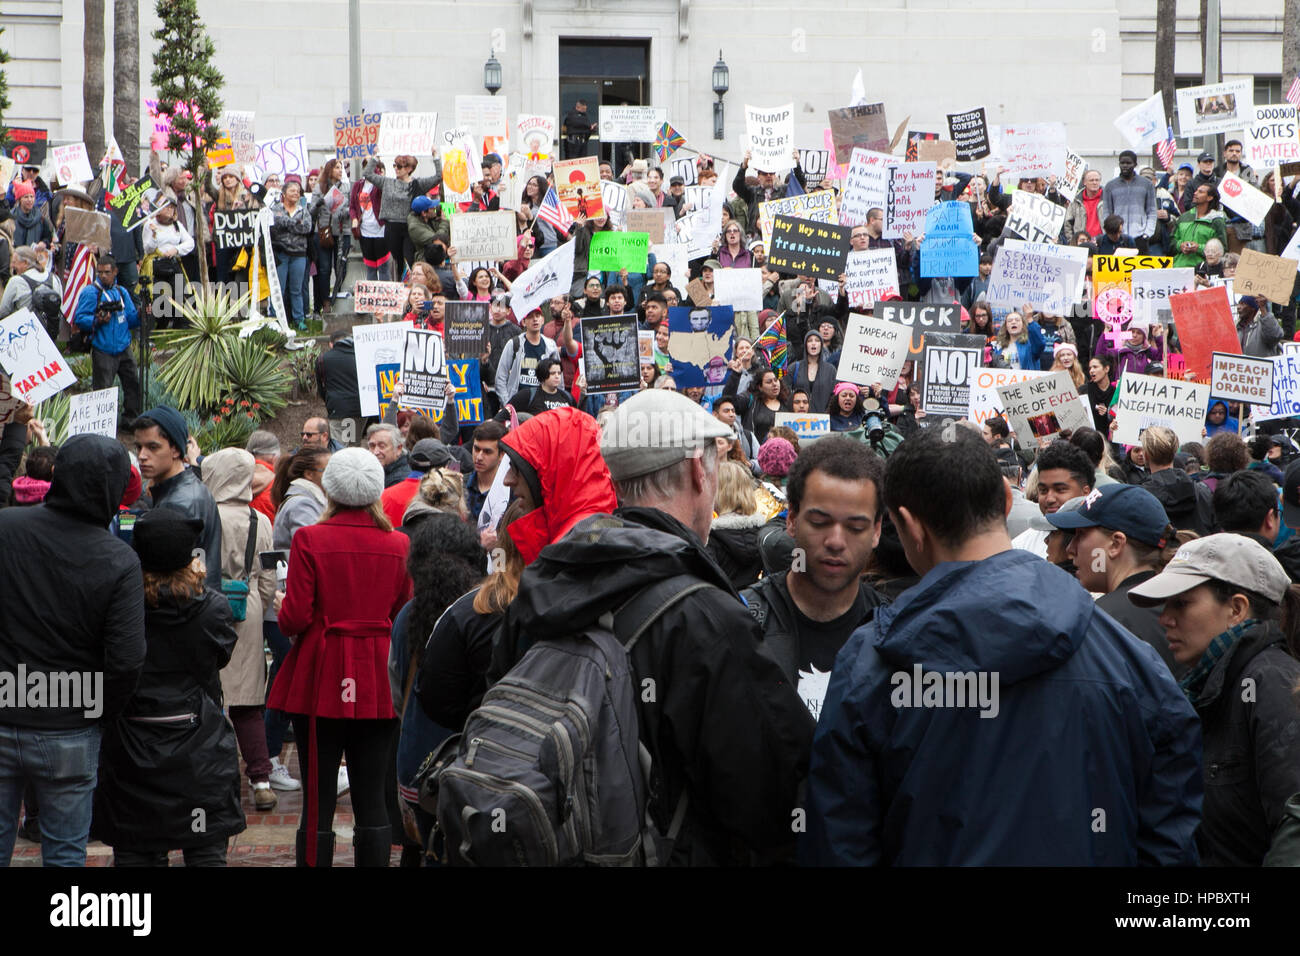 Los Angeles, USA. 20 February, 2017. Protestors gather at Los Angeles city hall for ‘Not Presidents Day’ rally. Zack Clark/Alamay Live News Stock Photo